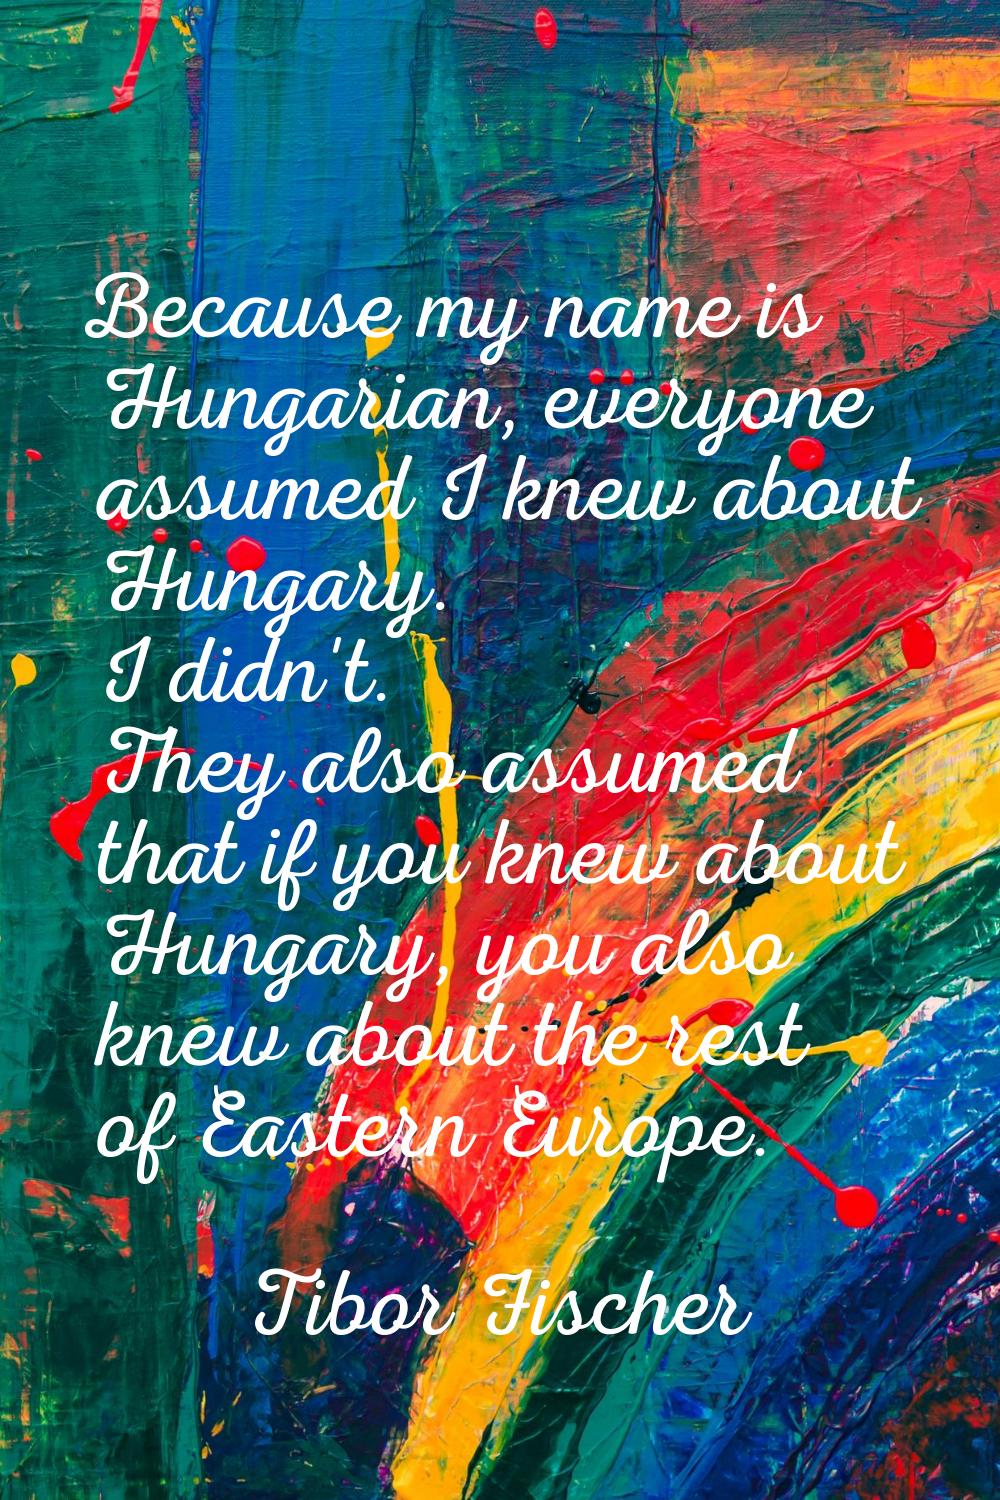 Because my name is Hungarian, everyone assumed I knew about Hungary. I didn't. They also assumed th